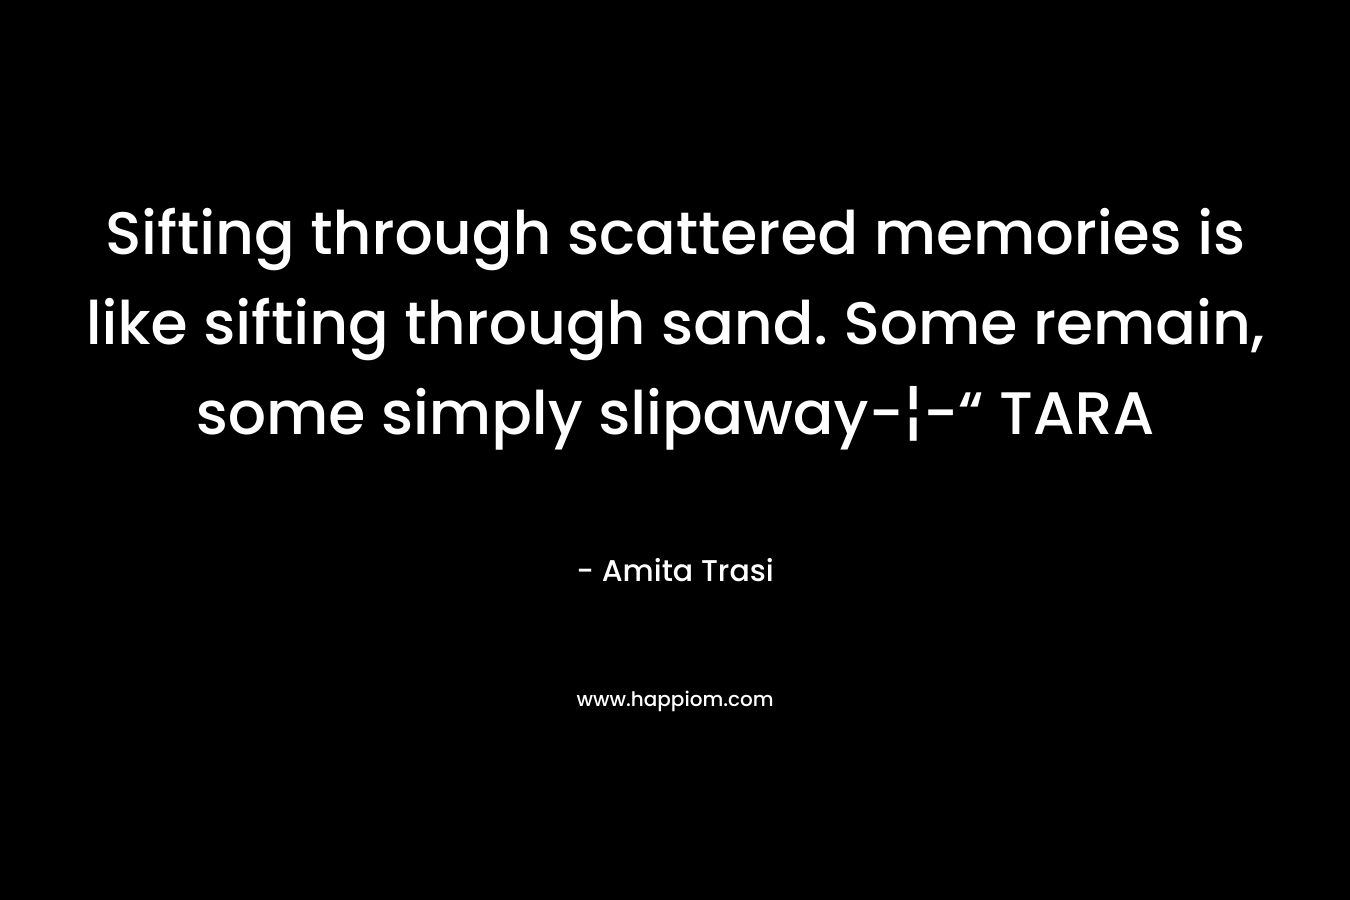 Sifting through scattered memories is like sifting through sand. Some remain, some simply slipaway-¦-“ TARA